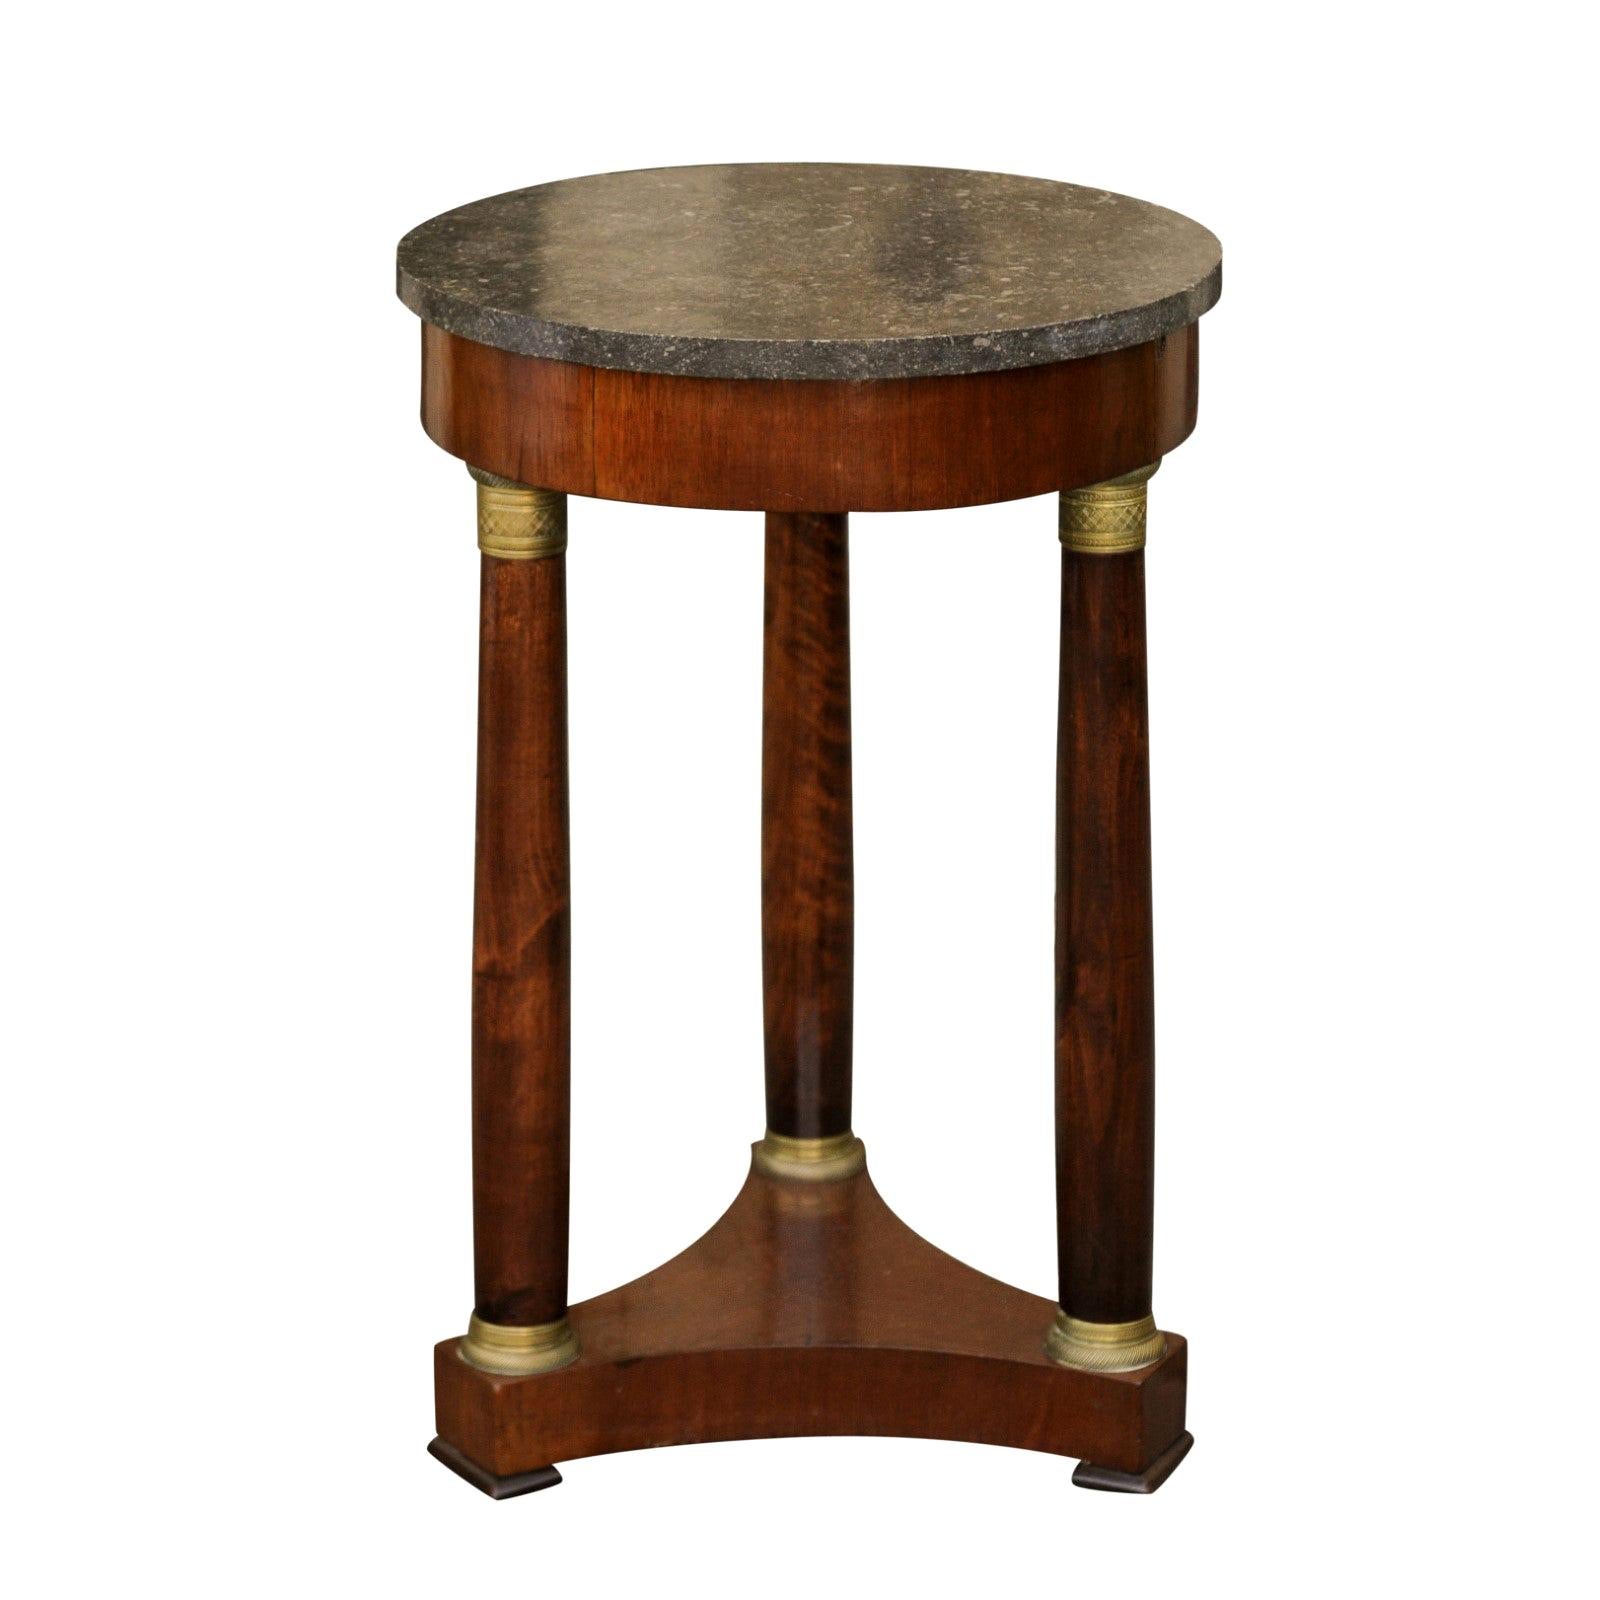 French Empire Style Walnut Gueridon Table with Marble Top and Ormolu Mounts